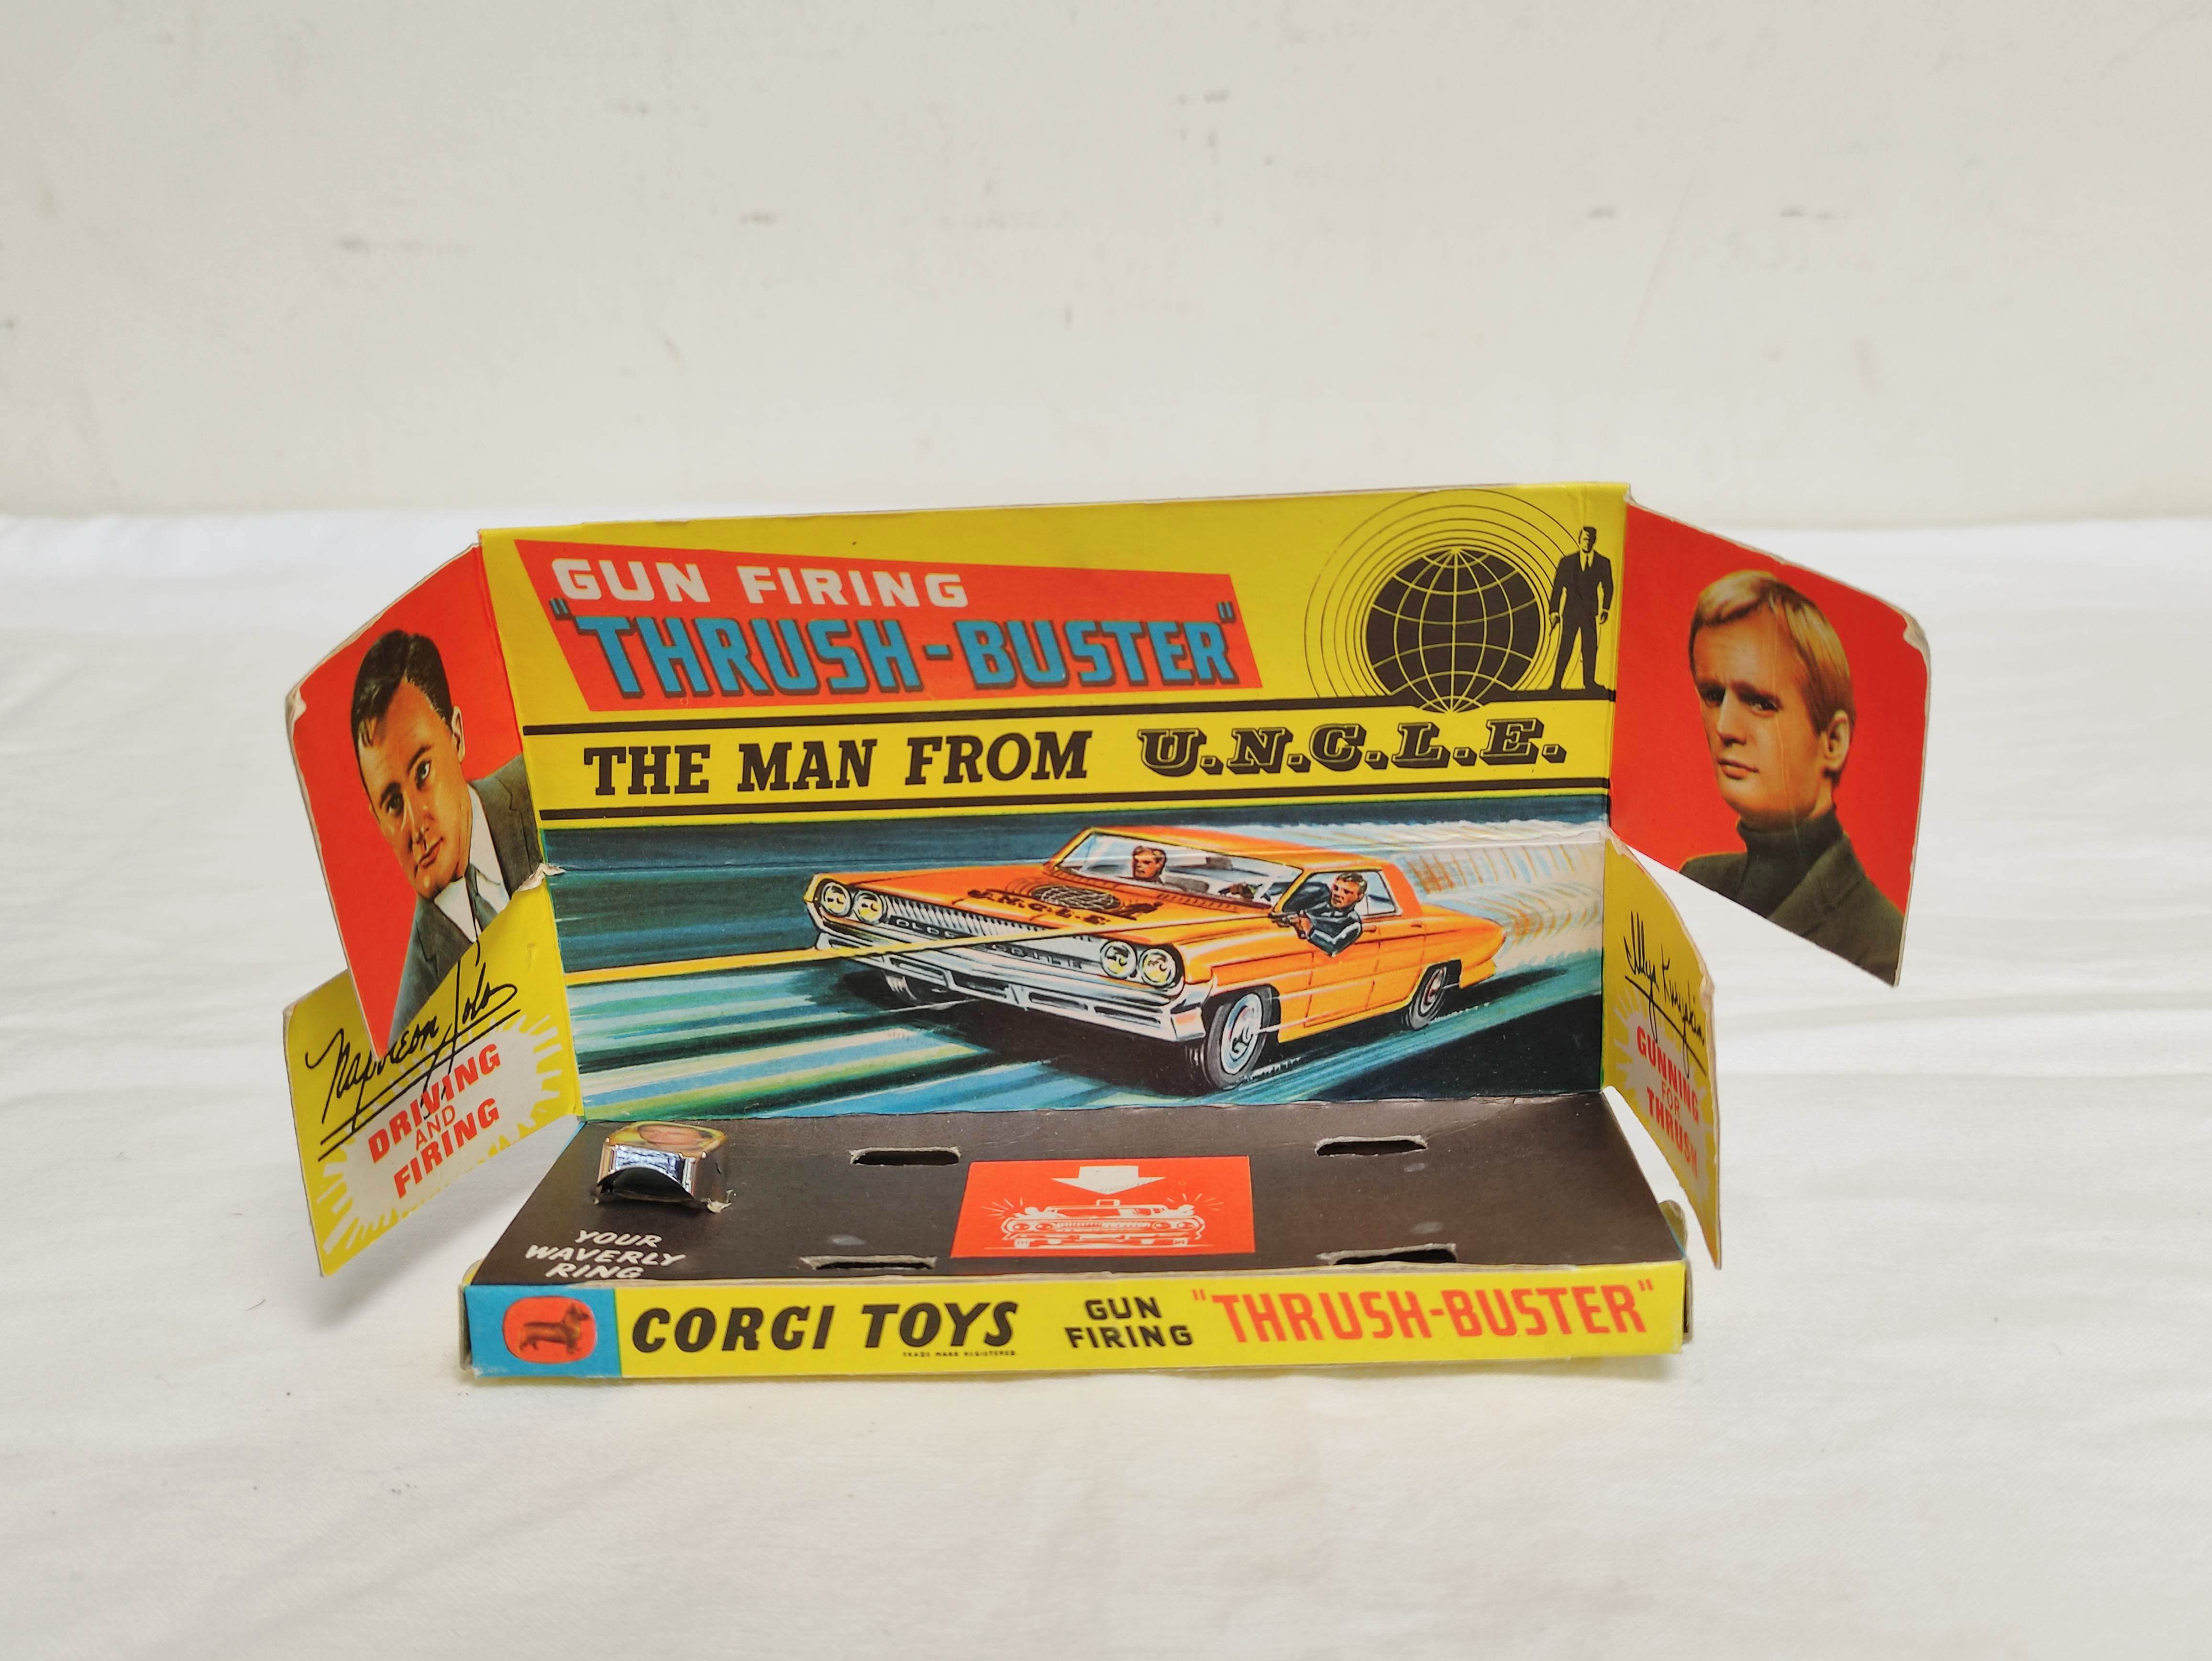 Corgi Toys- No 497 die cast The Man From U.N.C.L.E Gun Firing Thrush Buster with rotating spotlights - Image 6 of 9